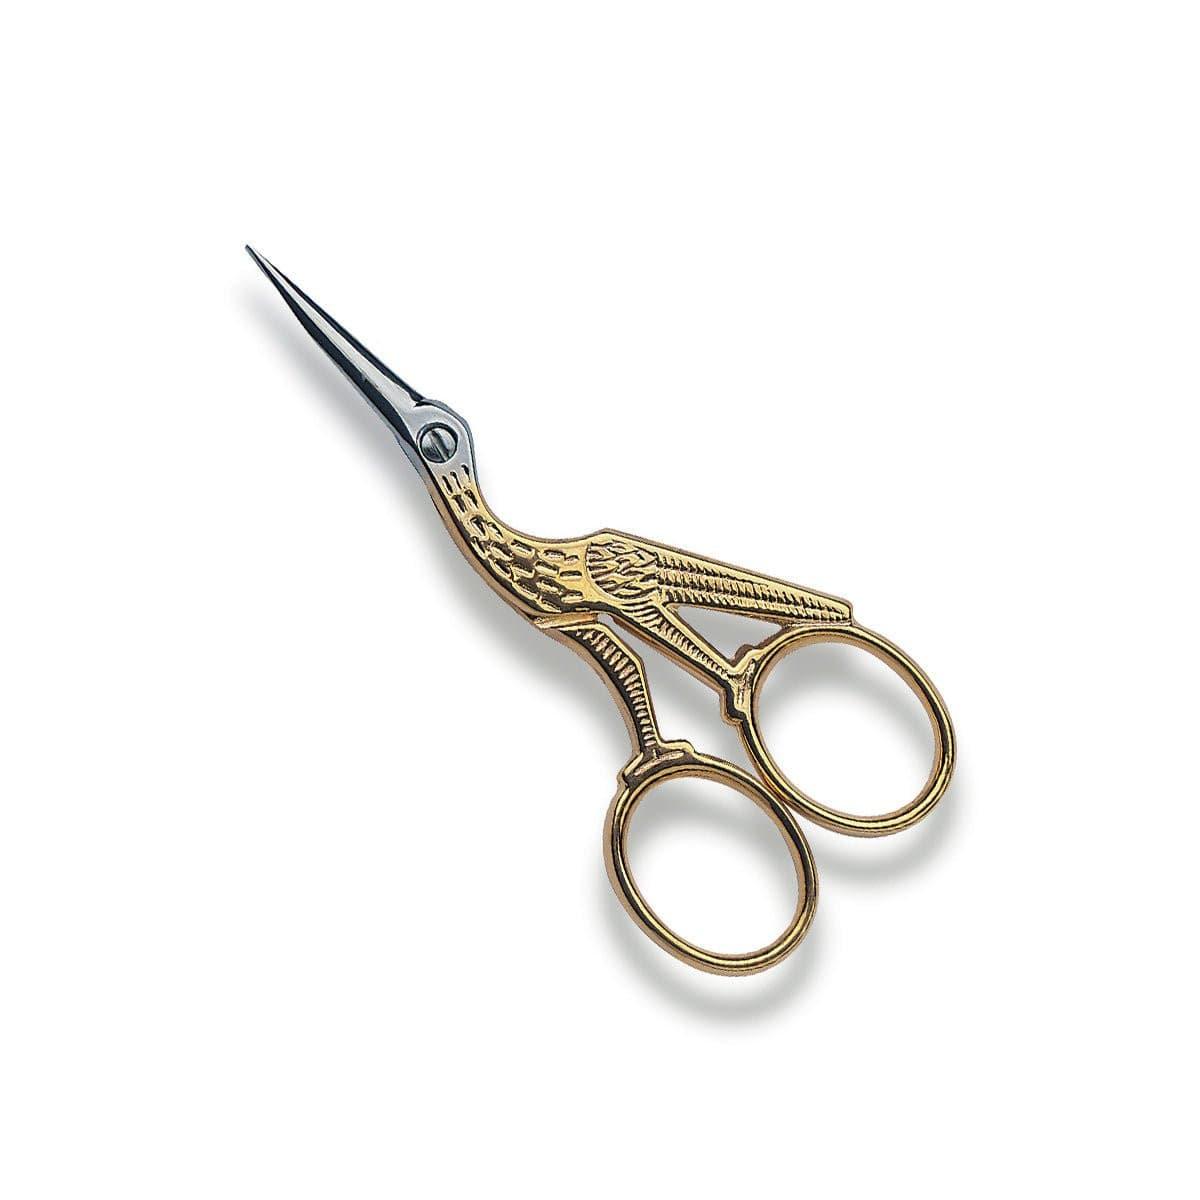 Victorinox Stork Embroidery Scissors, 12cm, Gold-Plated - Knife Store